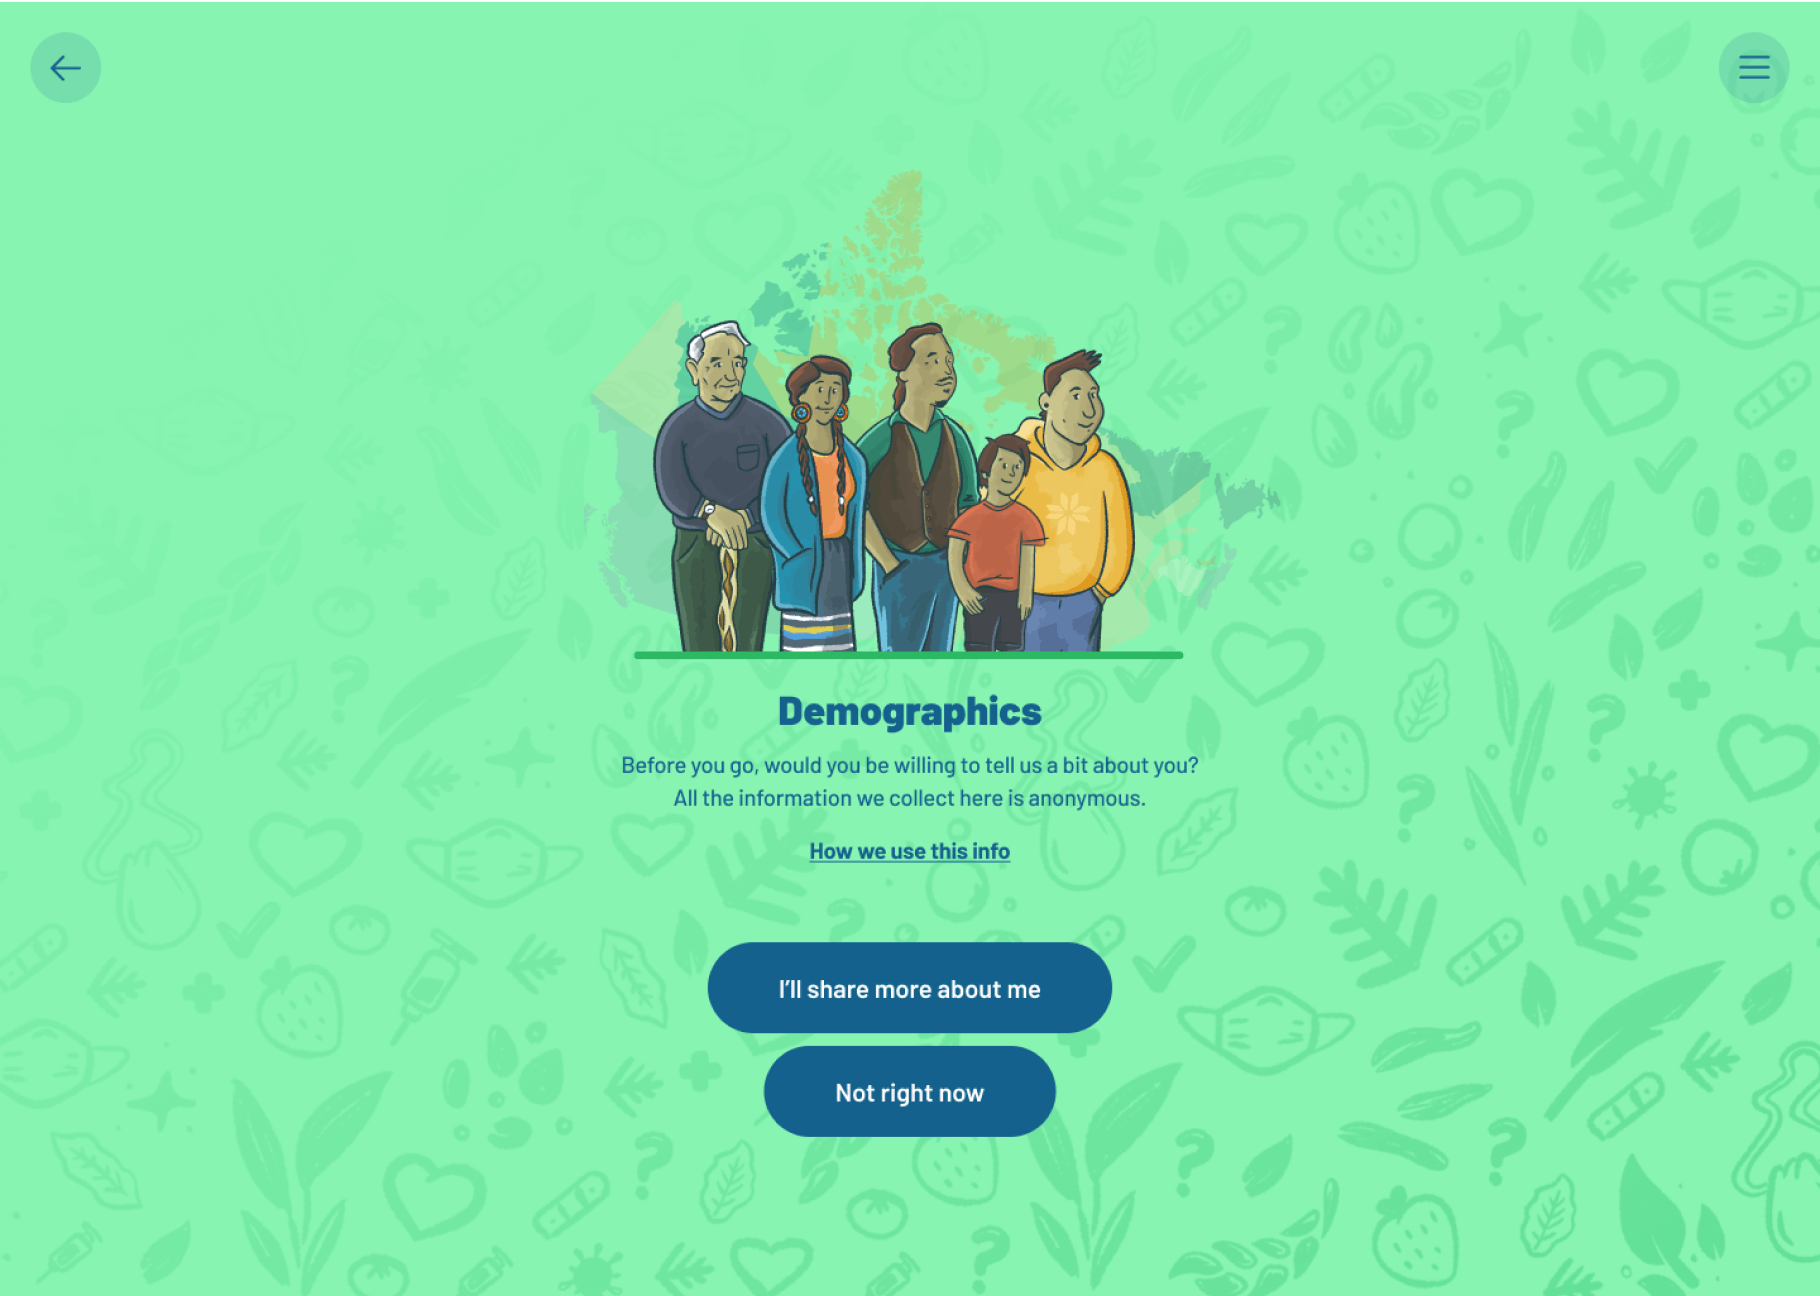 A screenshot of the demographics prompt page, which includes an illustrated image of a diverse group of indigenous people standing together. Below them the text reads “Before you go, would you be willing to tell us a bit about you? All the information we collect here is anonymous”. The buttons “I’ll share more about me”, and “Not right now” fall below the text.